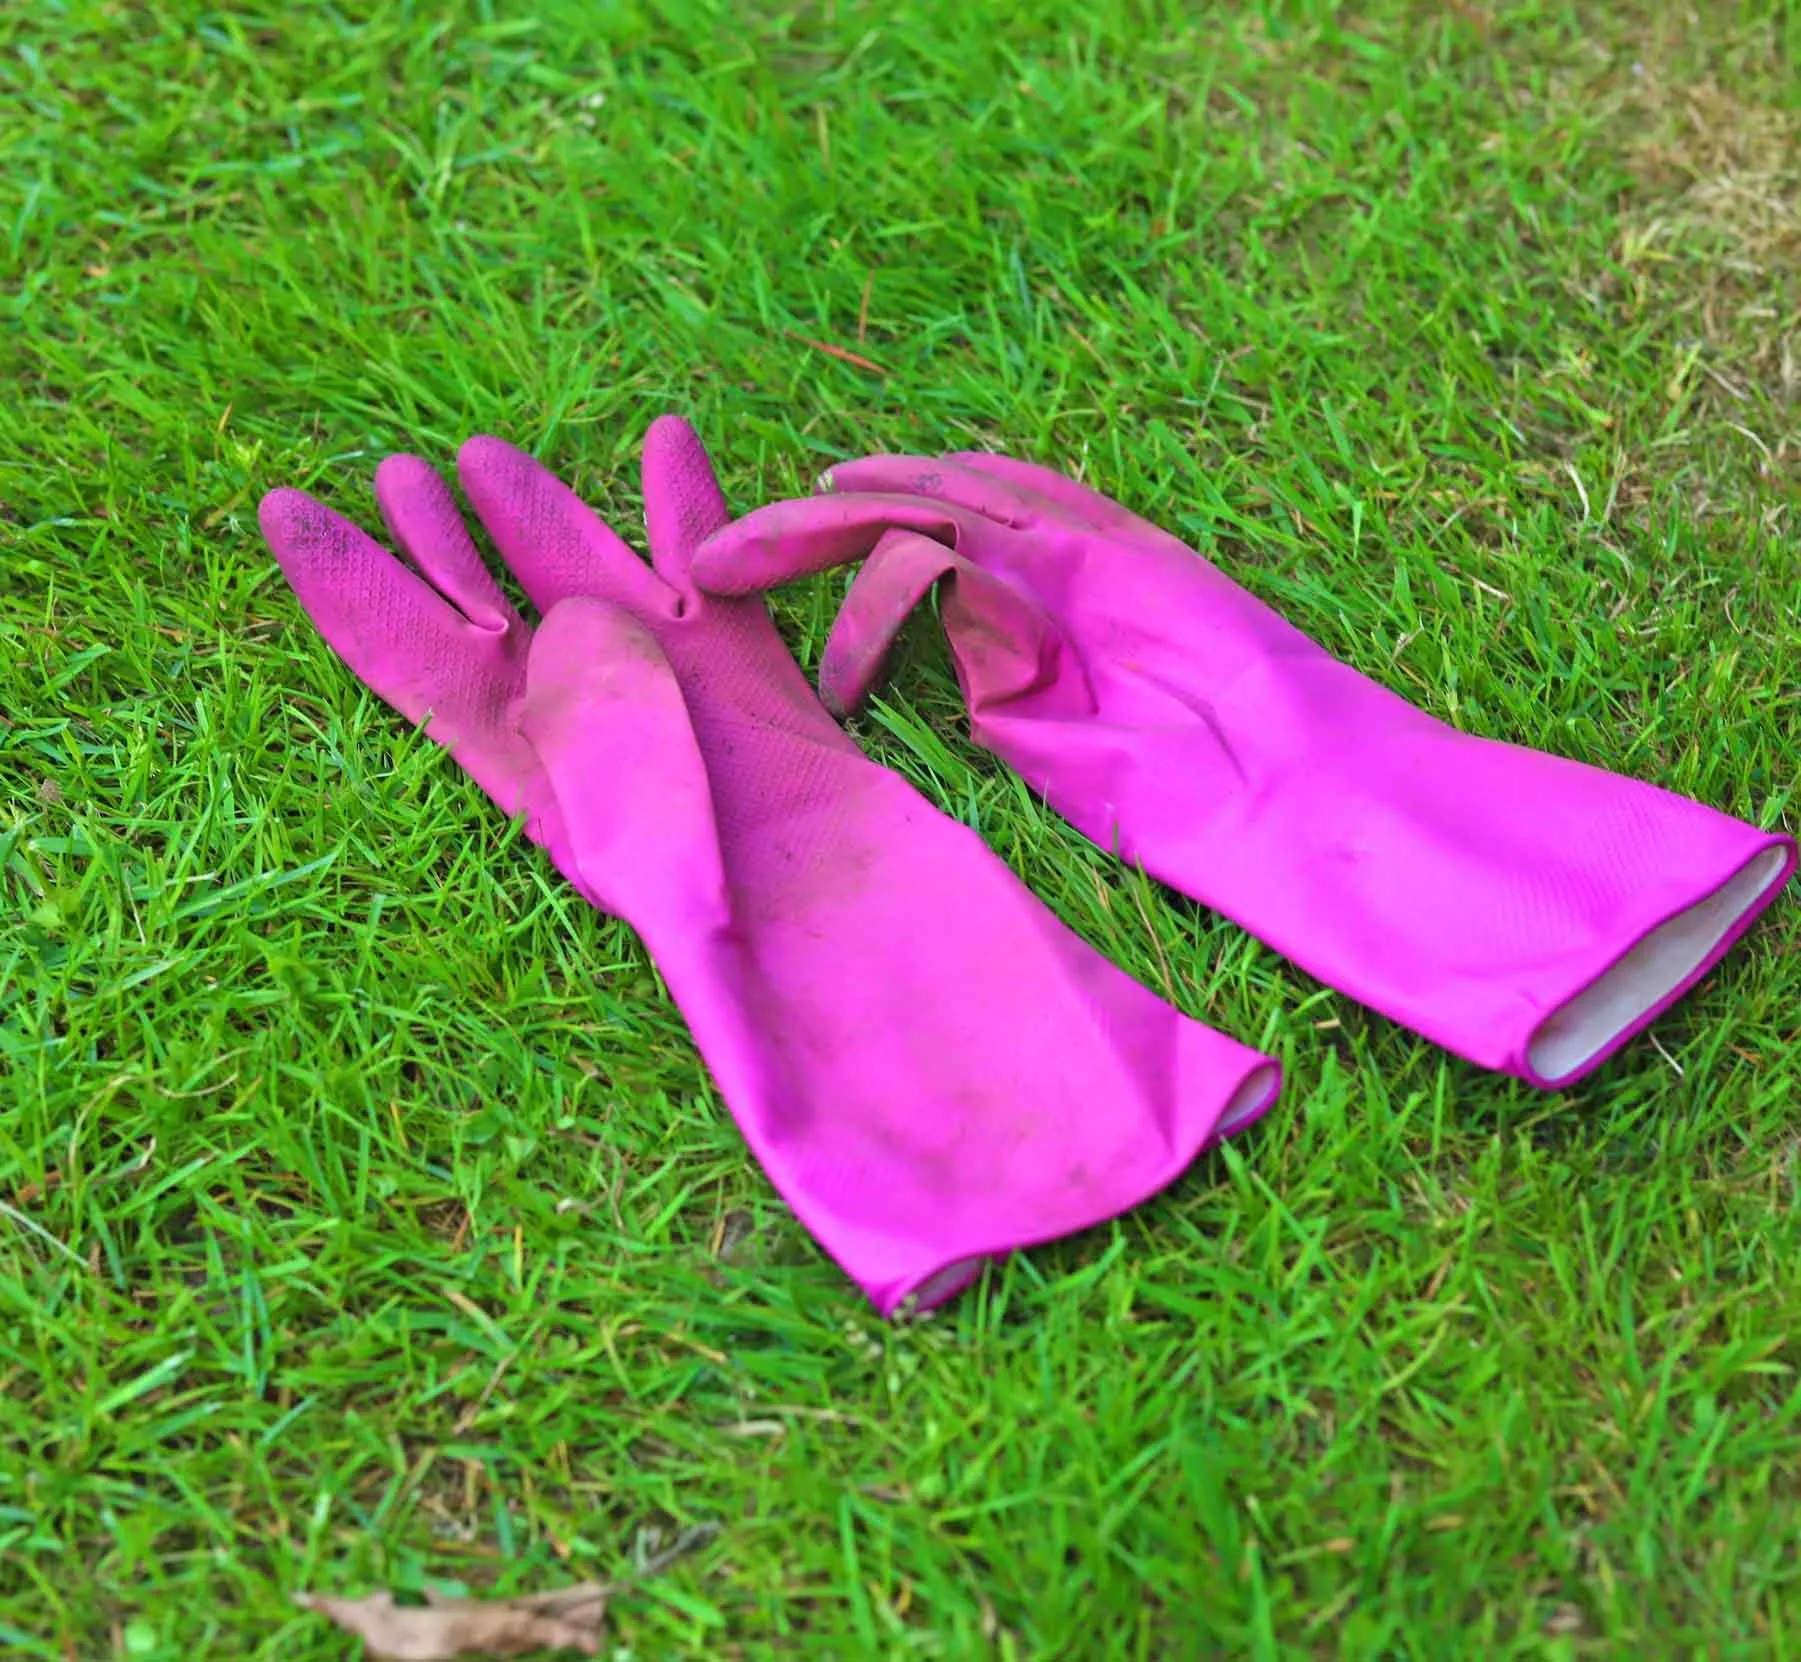 A pair of purple rubber gloves laid on green grass.